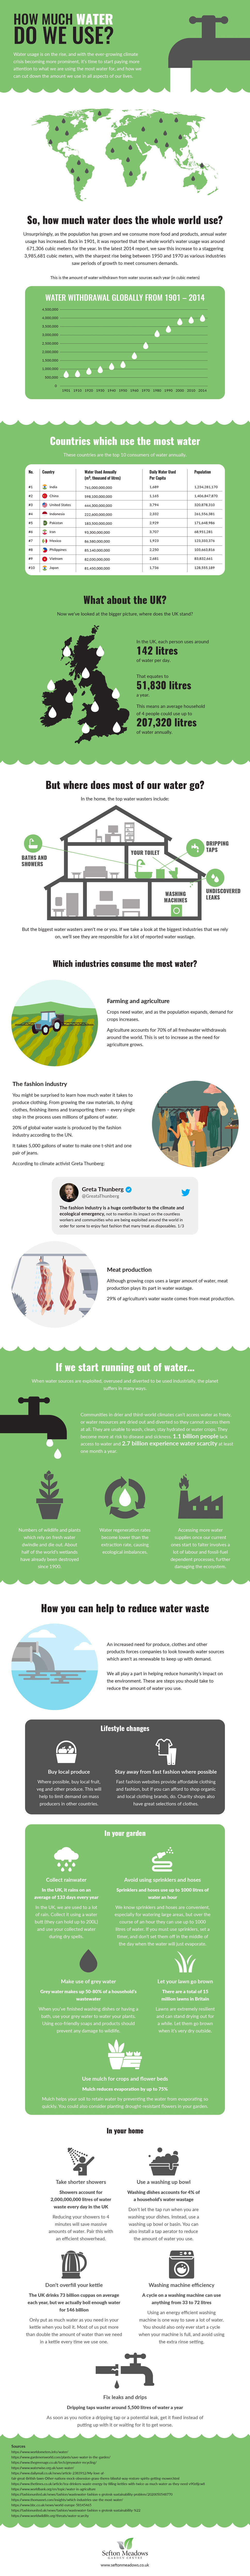 water waste infographic